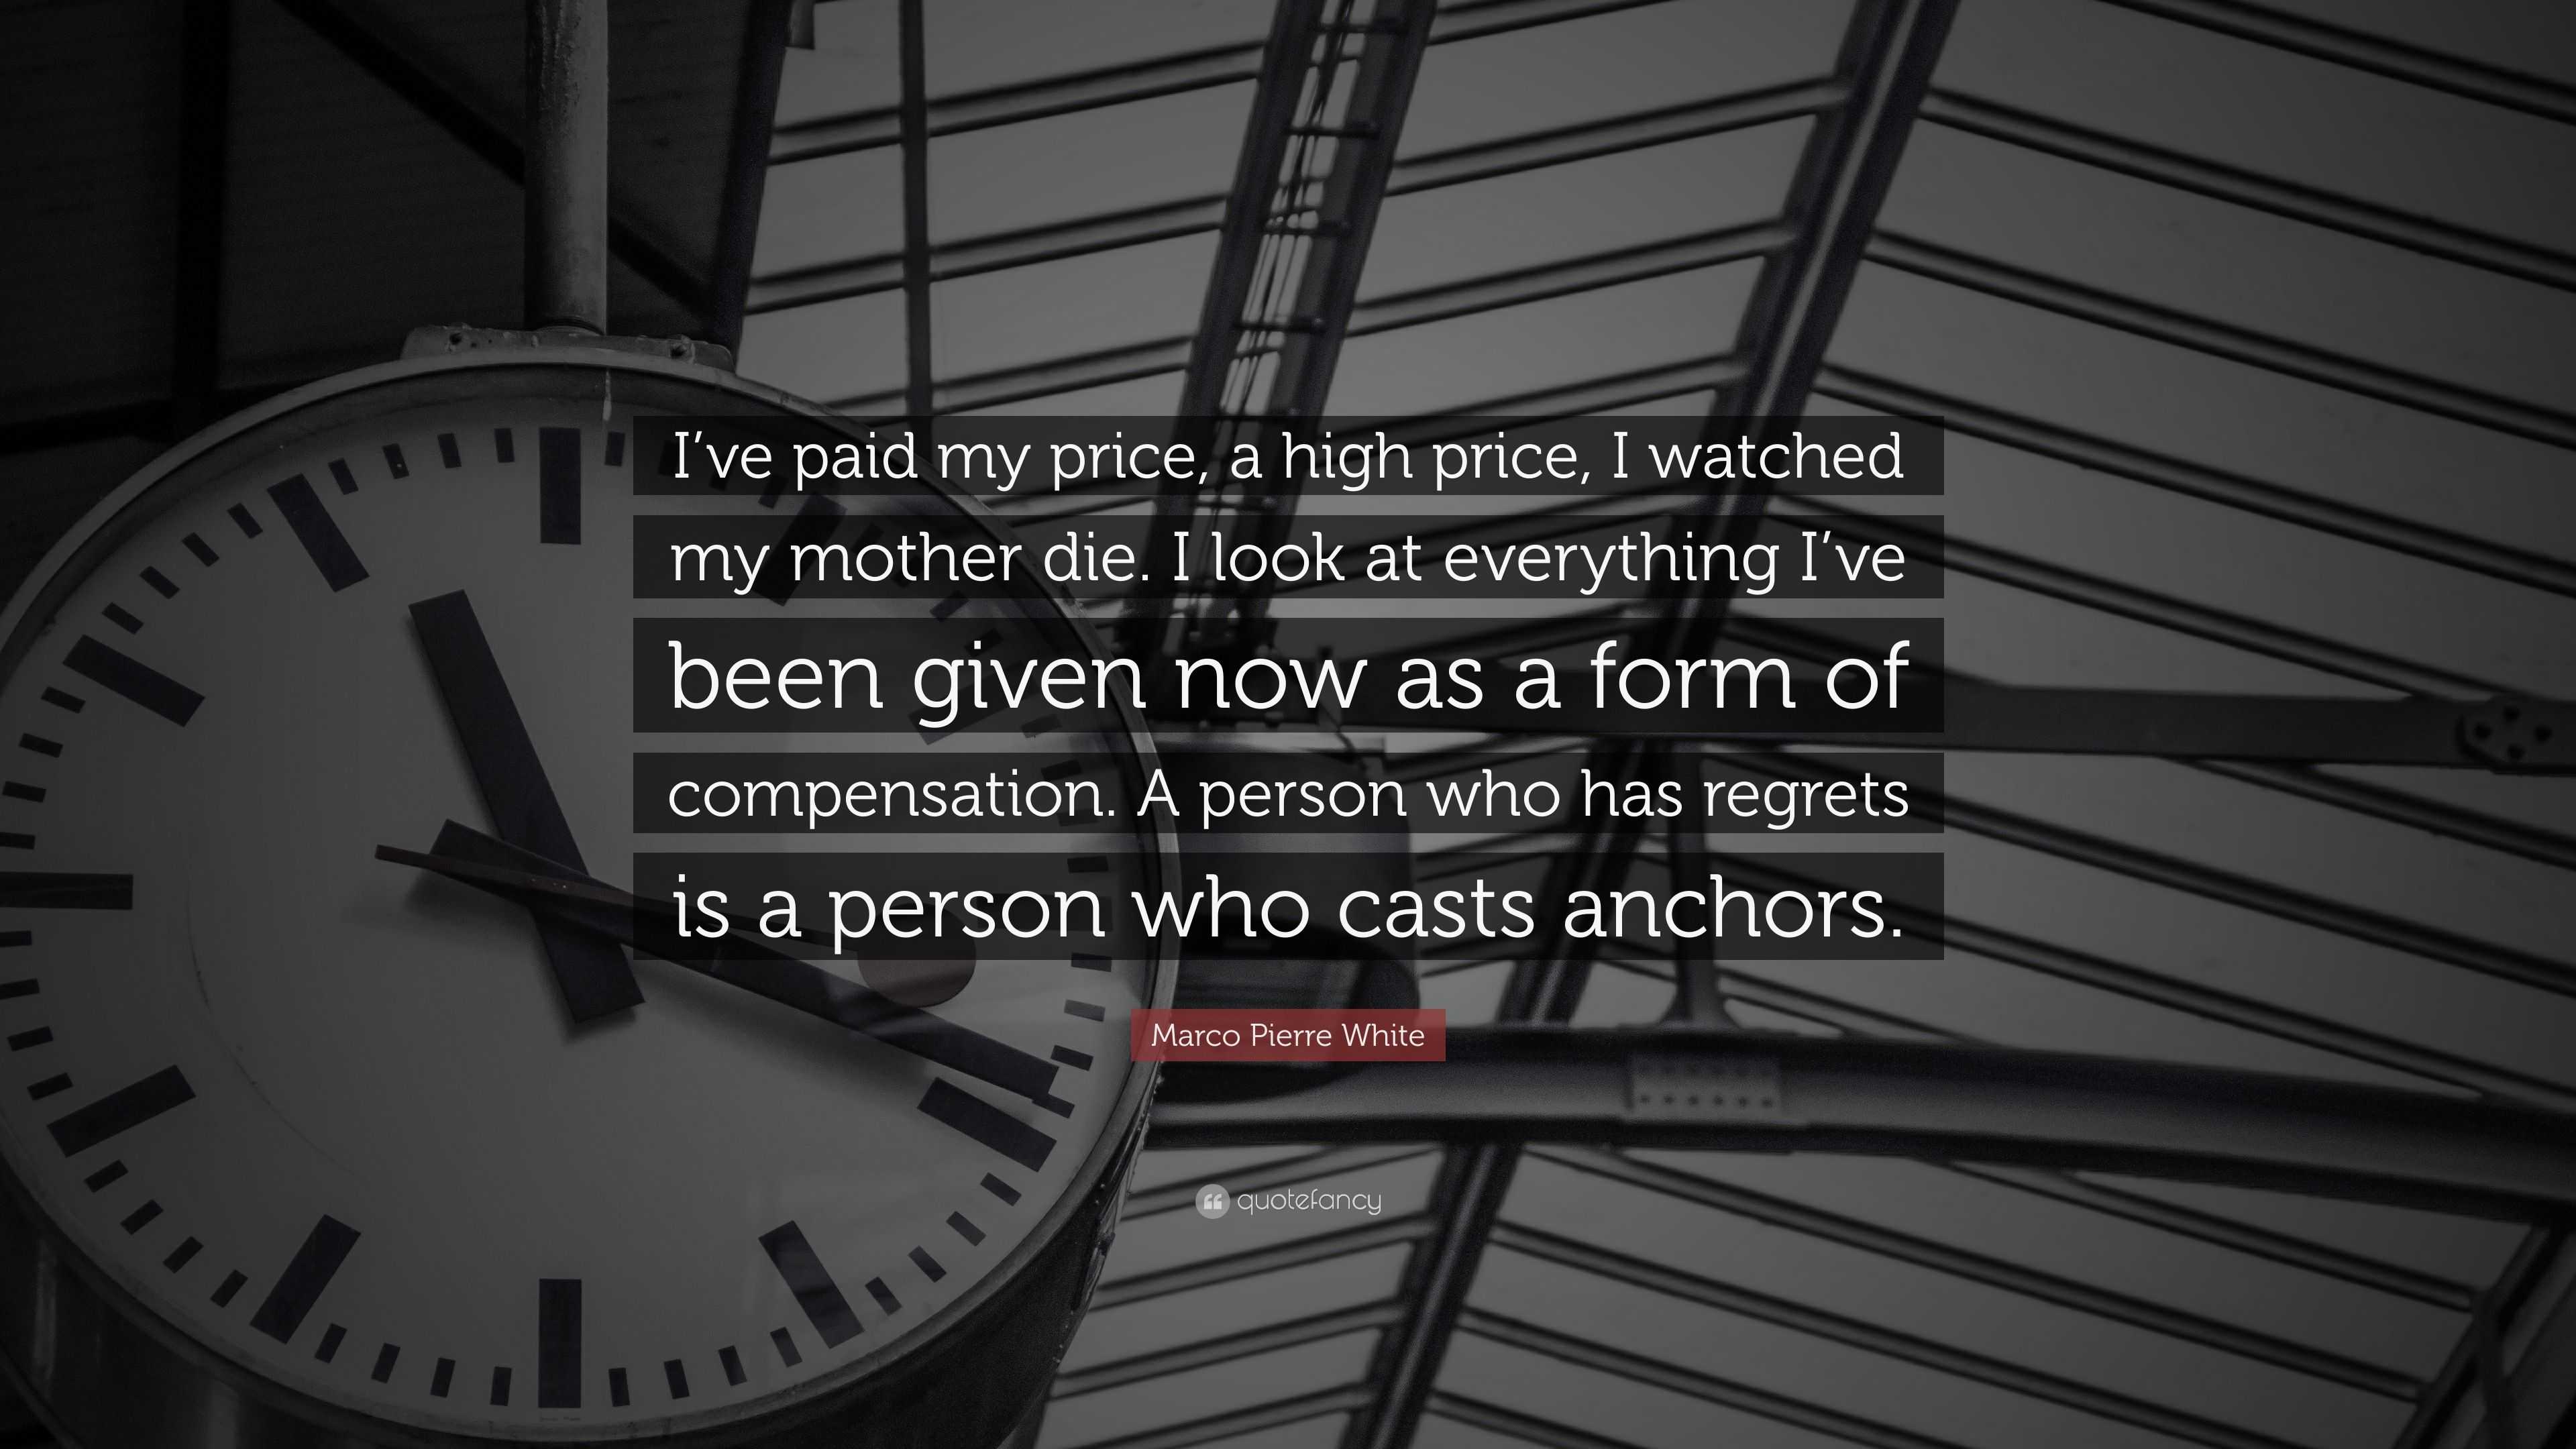 Marco Pierre White Quote: “I’ve paid my price, a high price, I watched ...